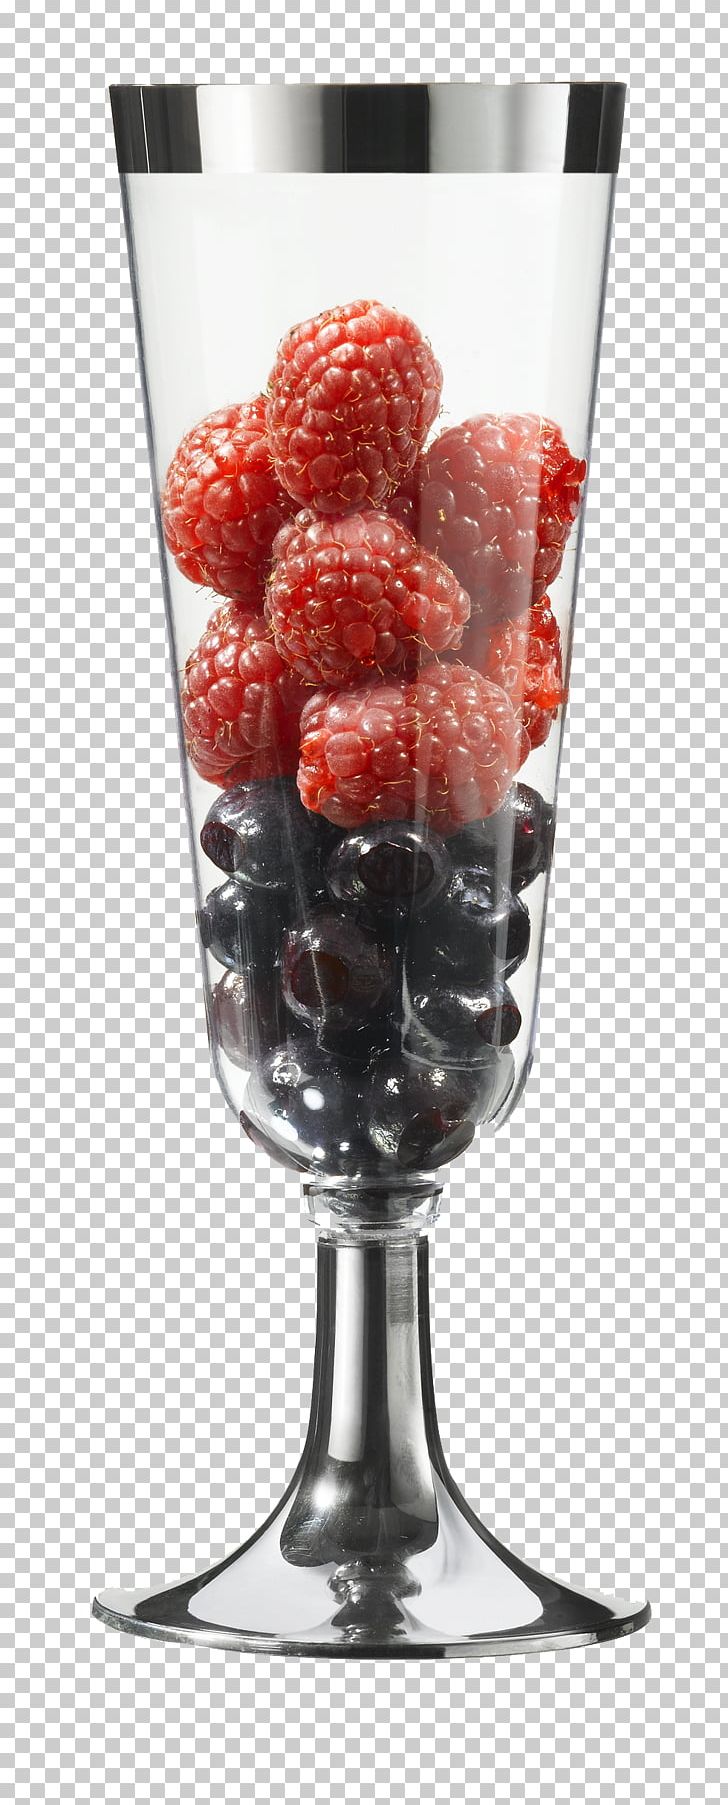 Vasomadrid Stemware Plastic Cup Glass PNG, Clipart, Basket, Berry, Champagne, Cup, Disposable Free PNG Download